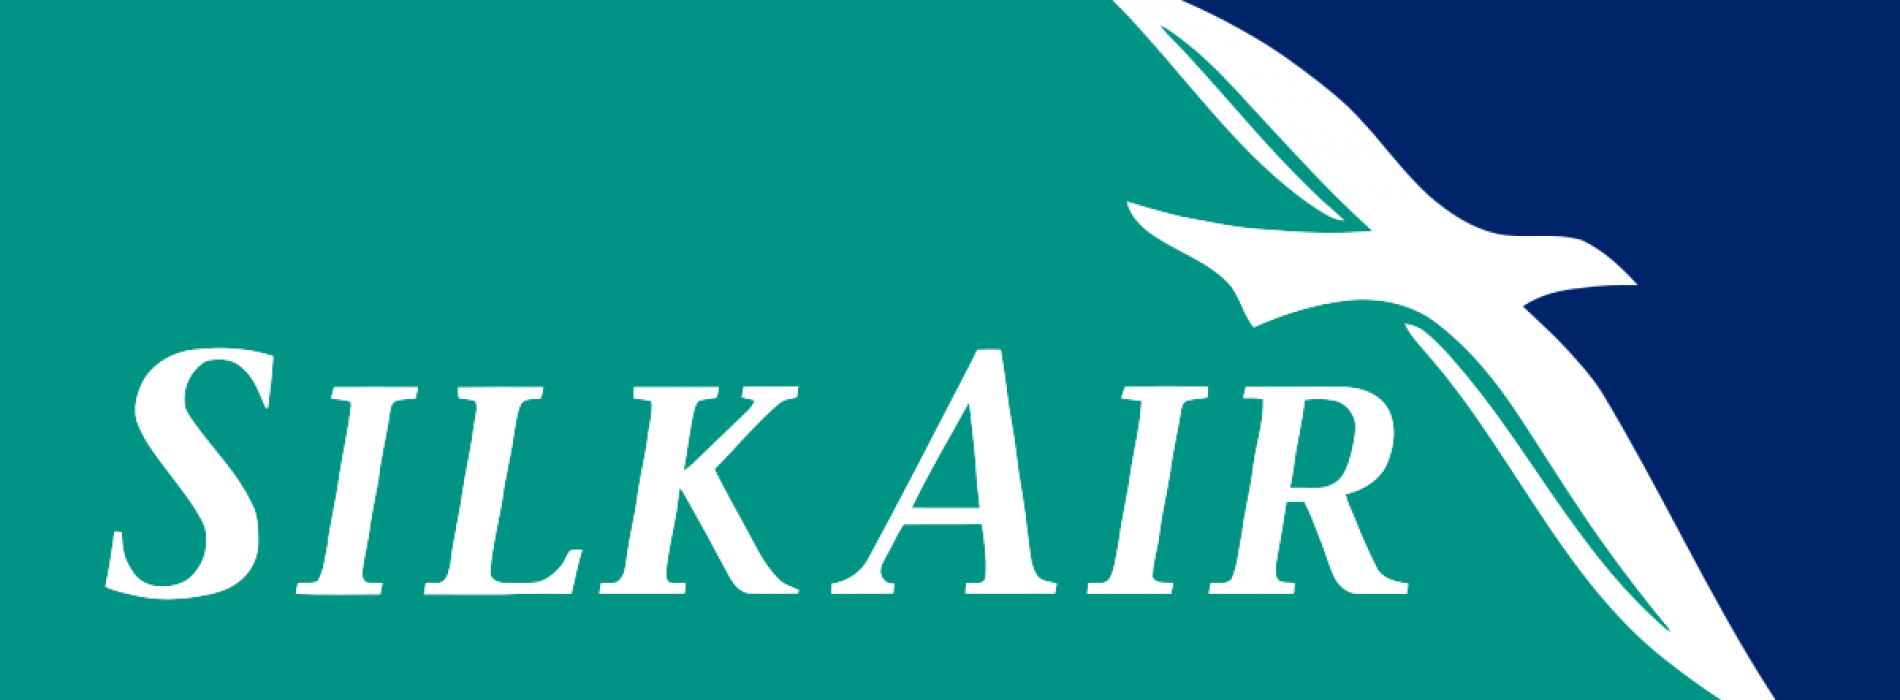 SilkAir to undergo major cabin product upgrade and be merged into SIA